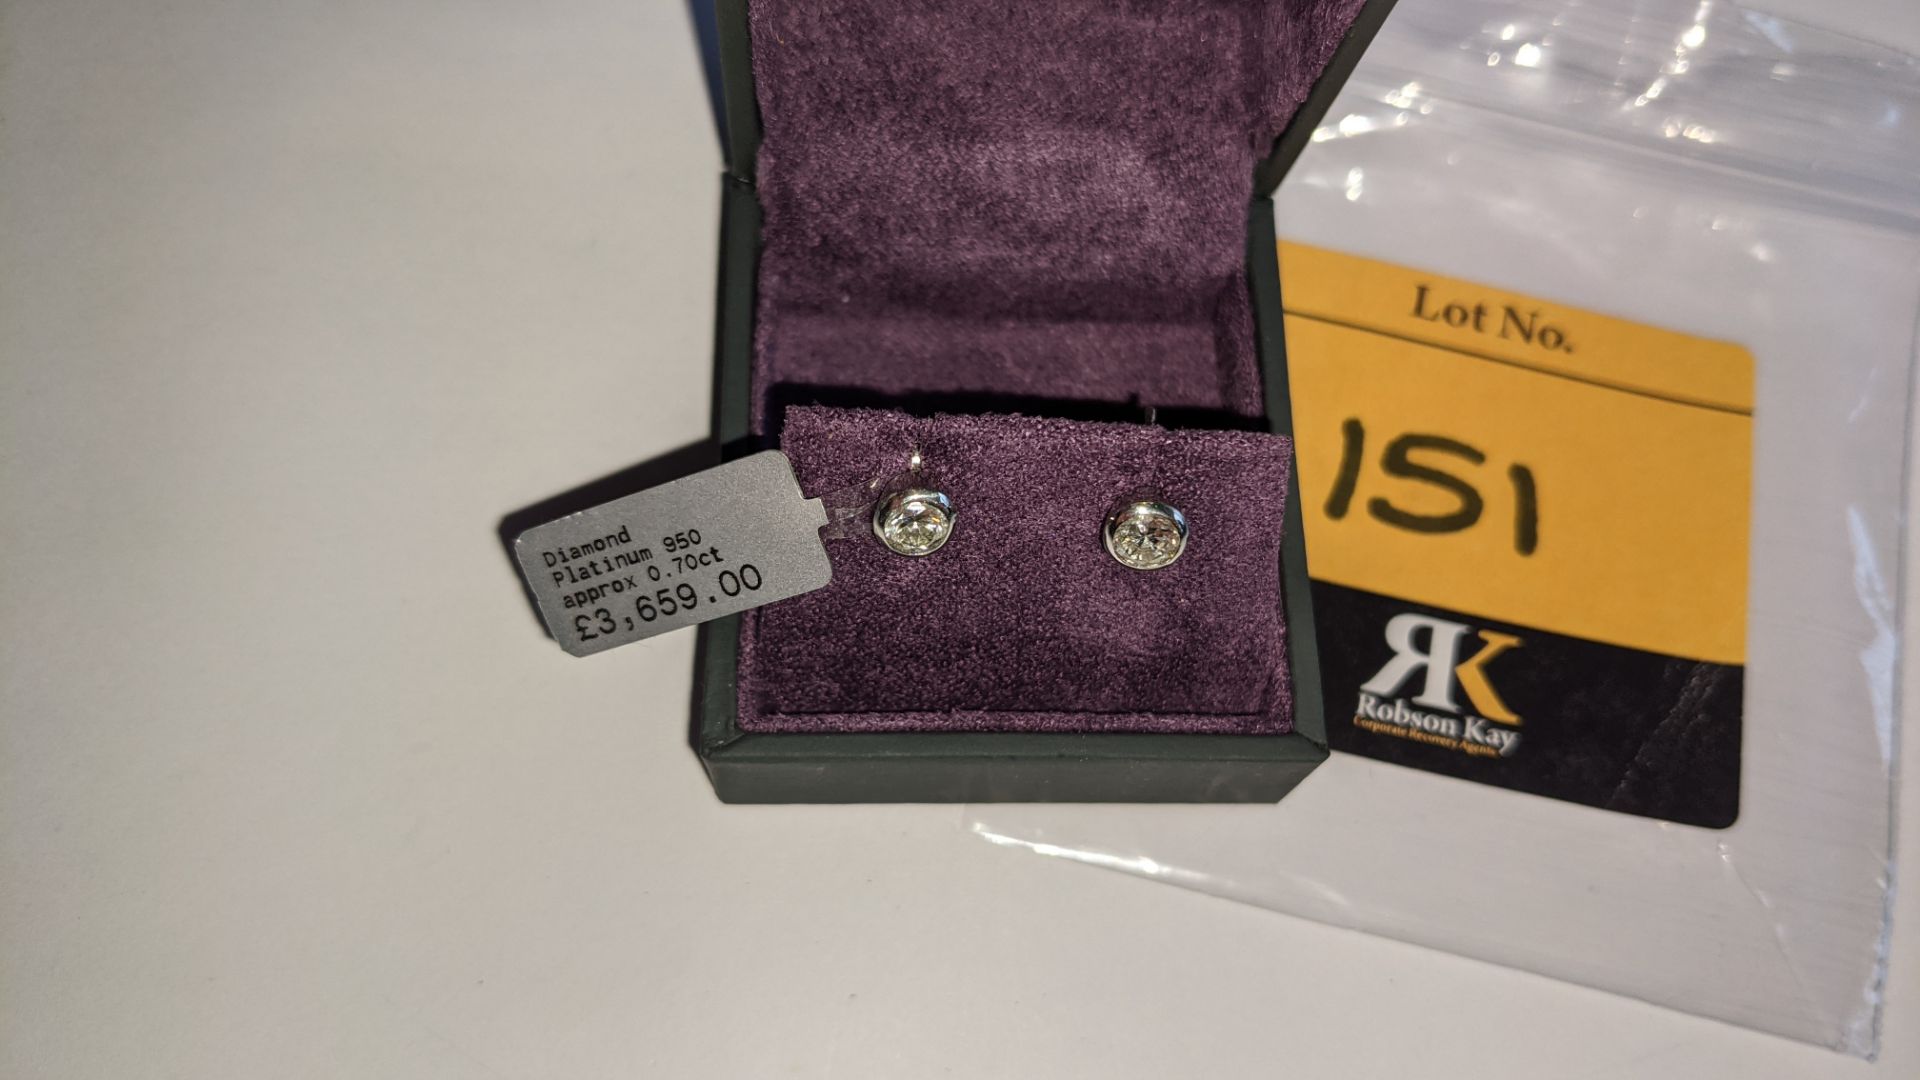 Pair of Platinum 950 & diamond earrings with total ctw of approx. 0.70ct RRP £3,659 - Image 4 of 10